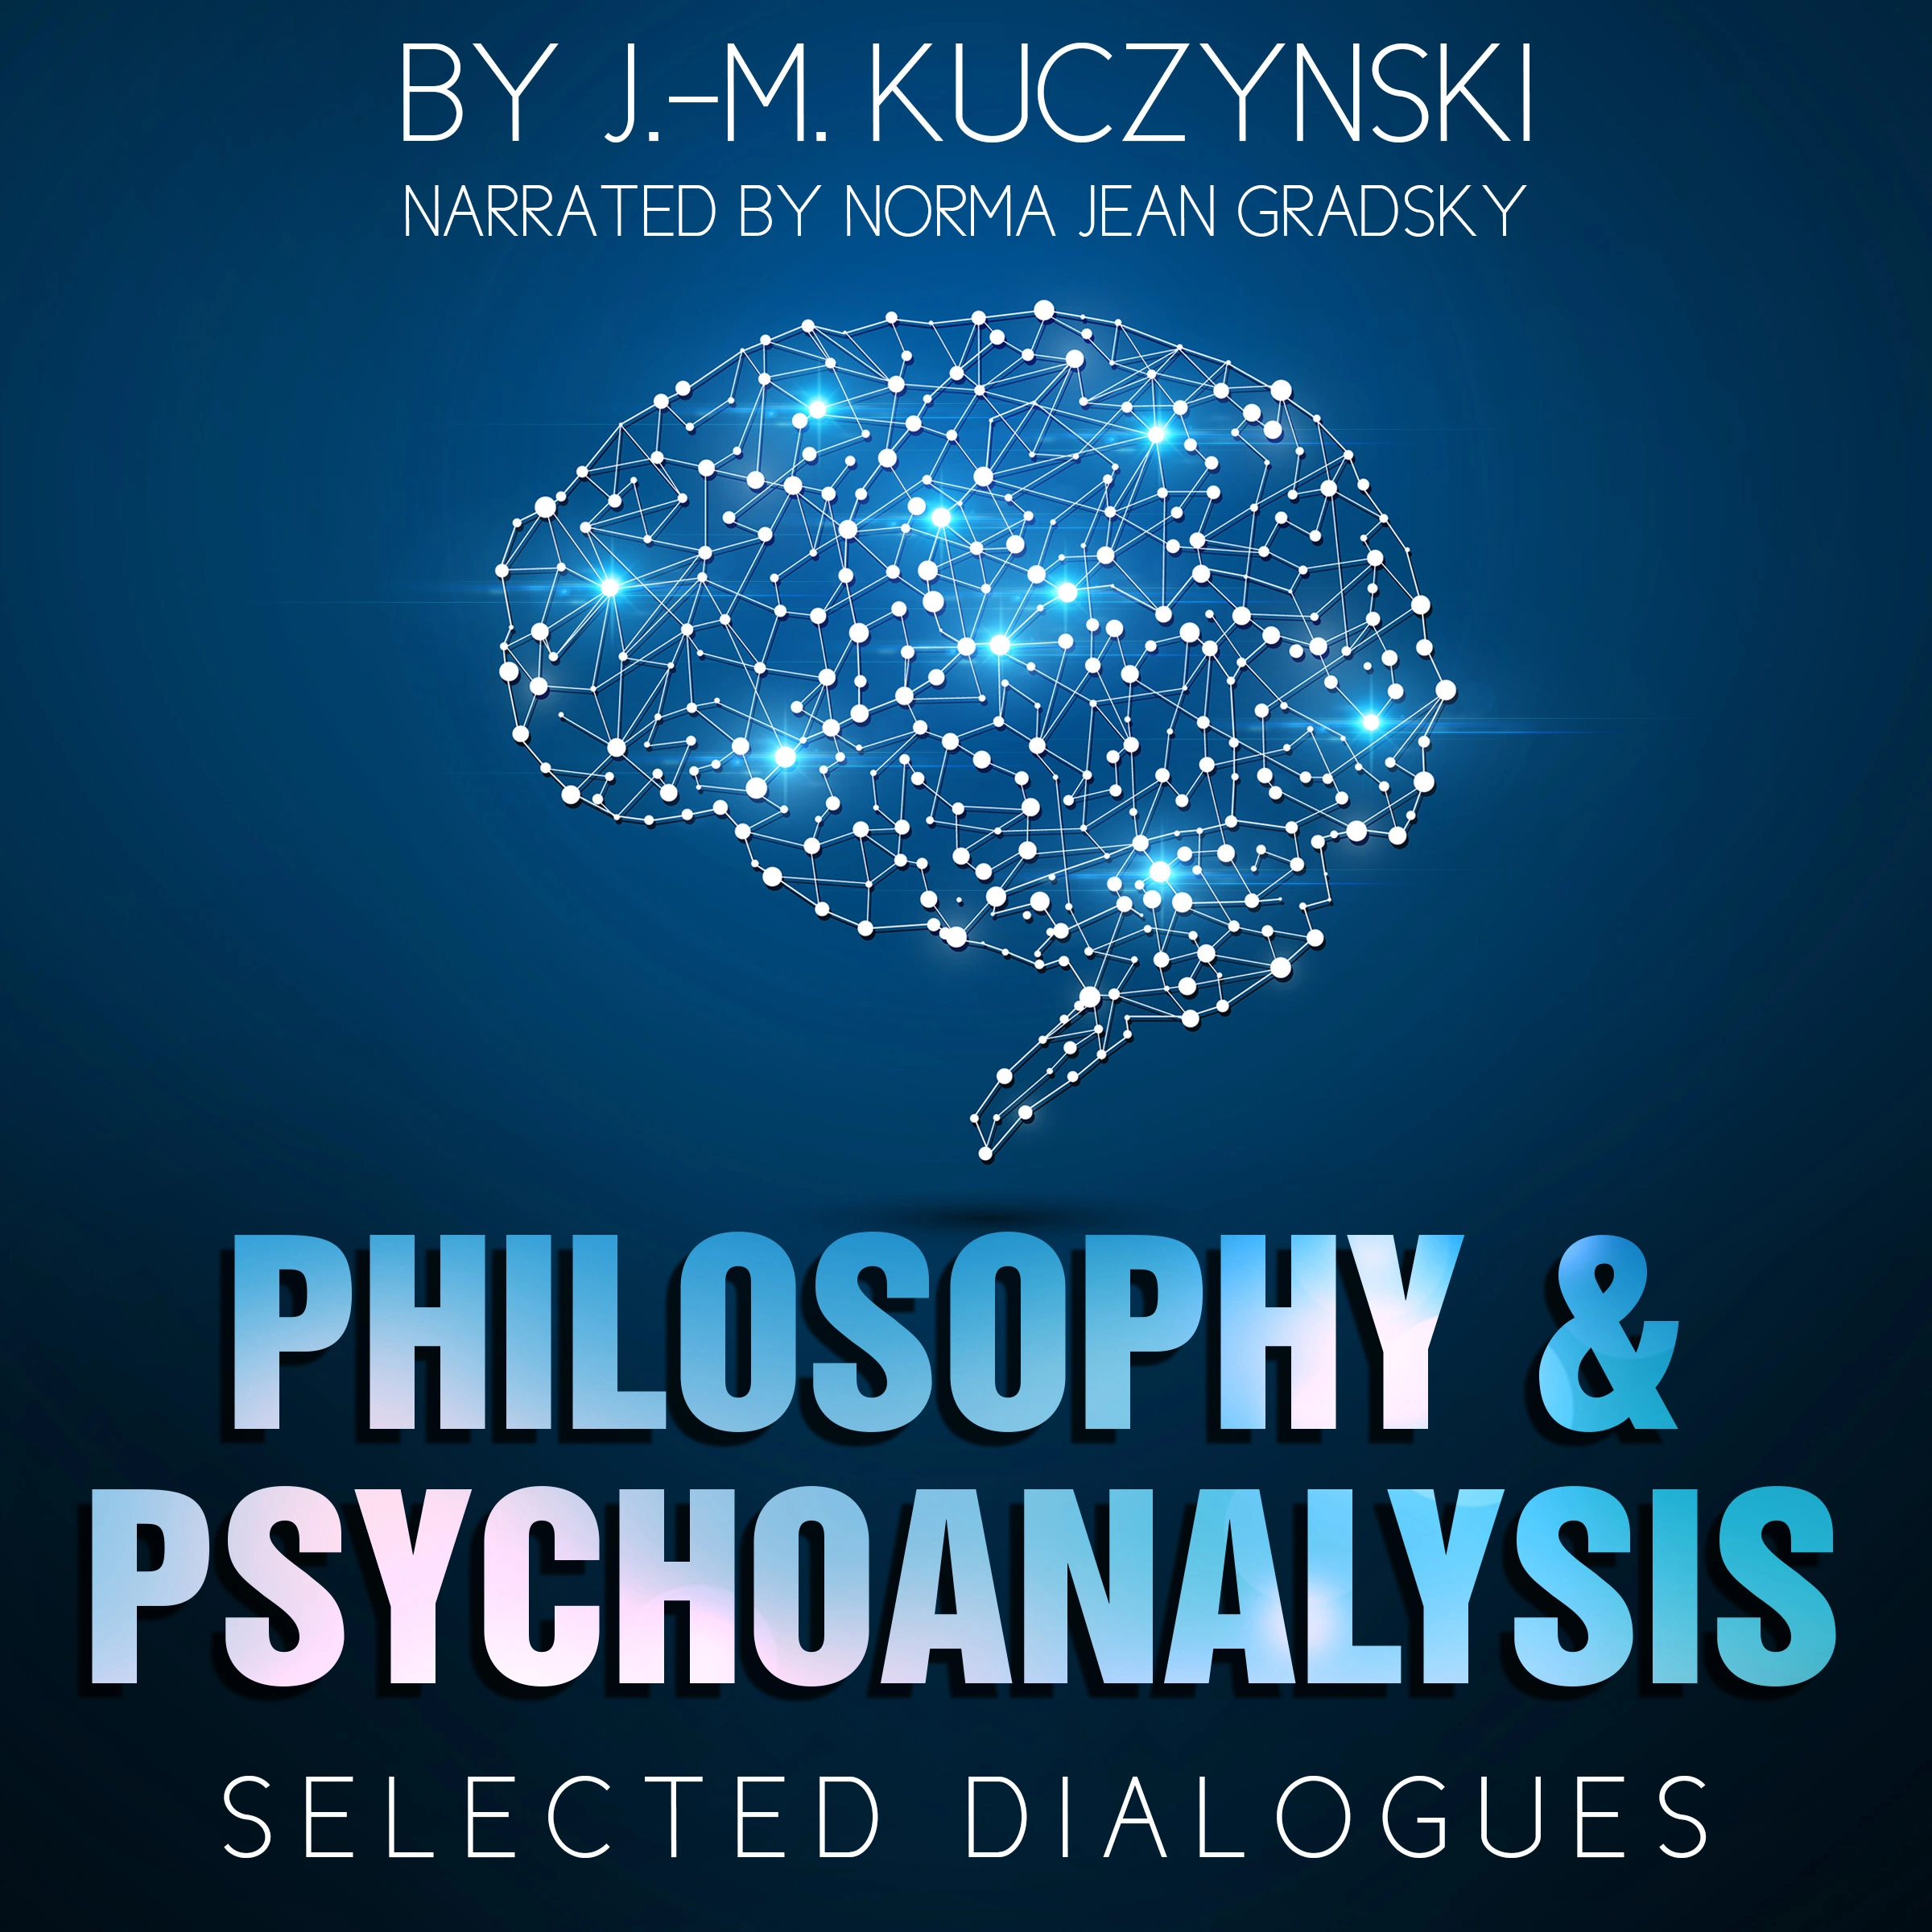 Philosophy and Psychoanalysis : Selected Dialogues Audiobook by J.-M. Kuczynski